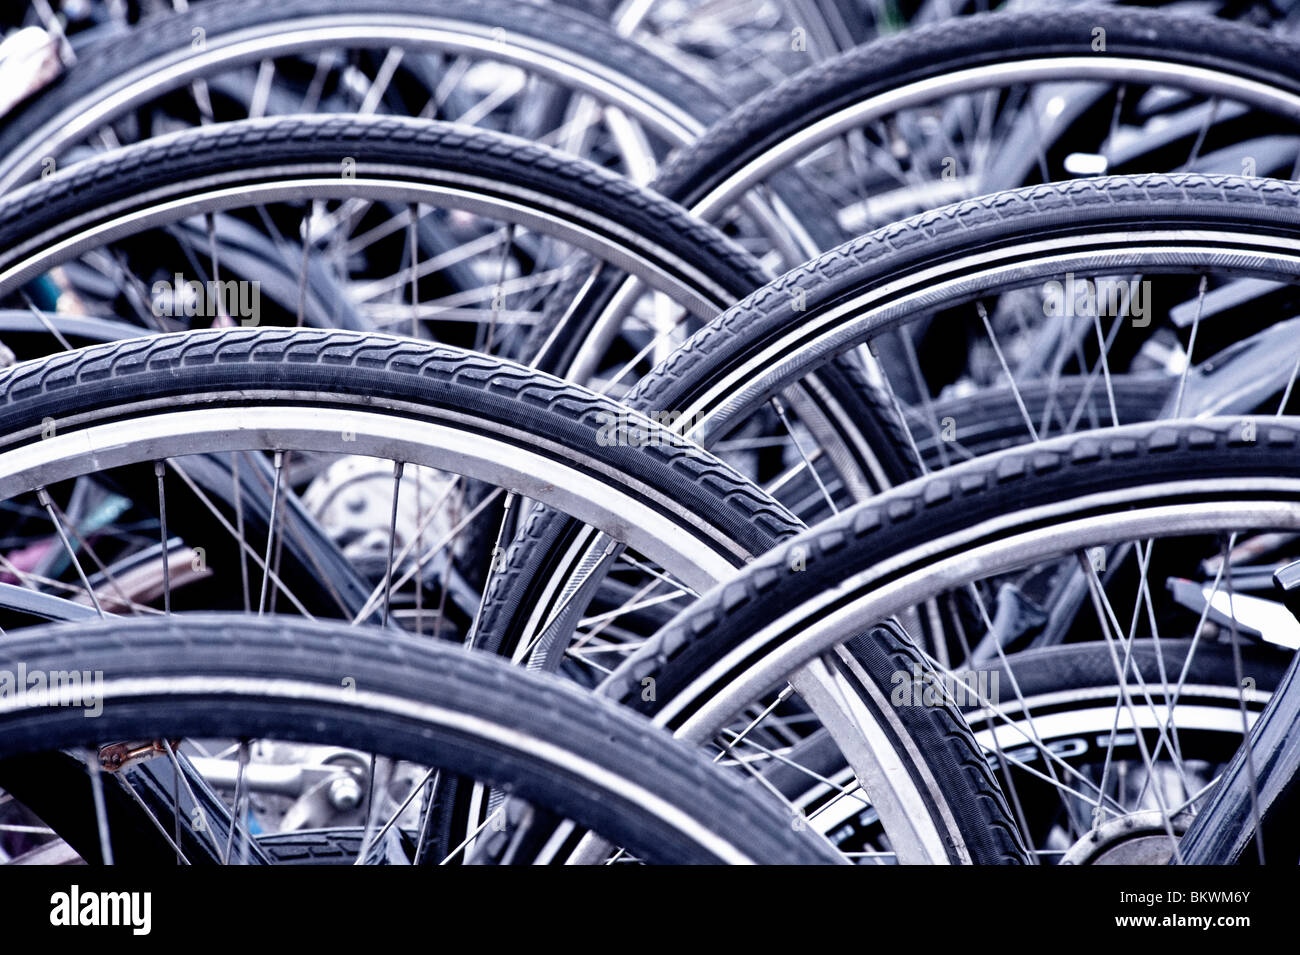 Many bicycles parked outside in city in The Netherlands Stock Photo